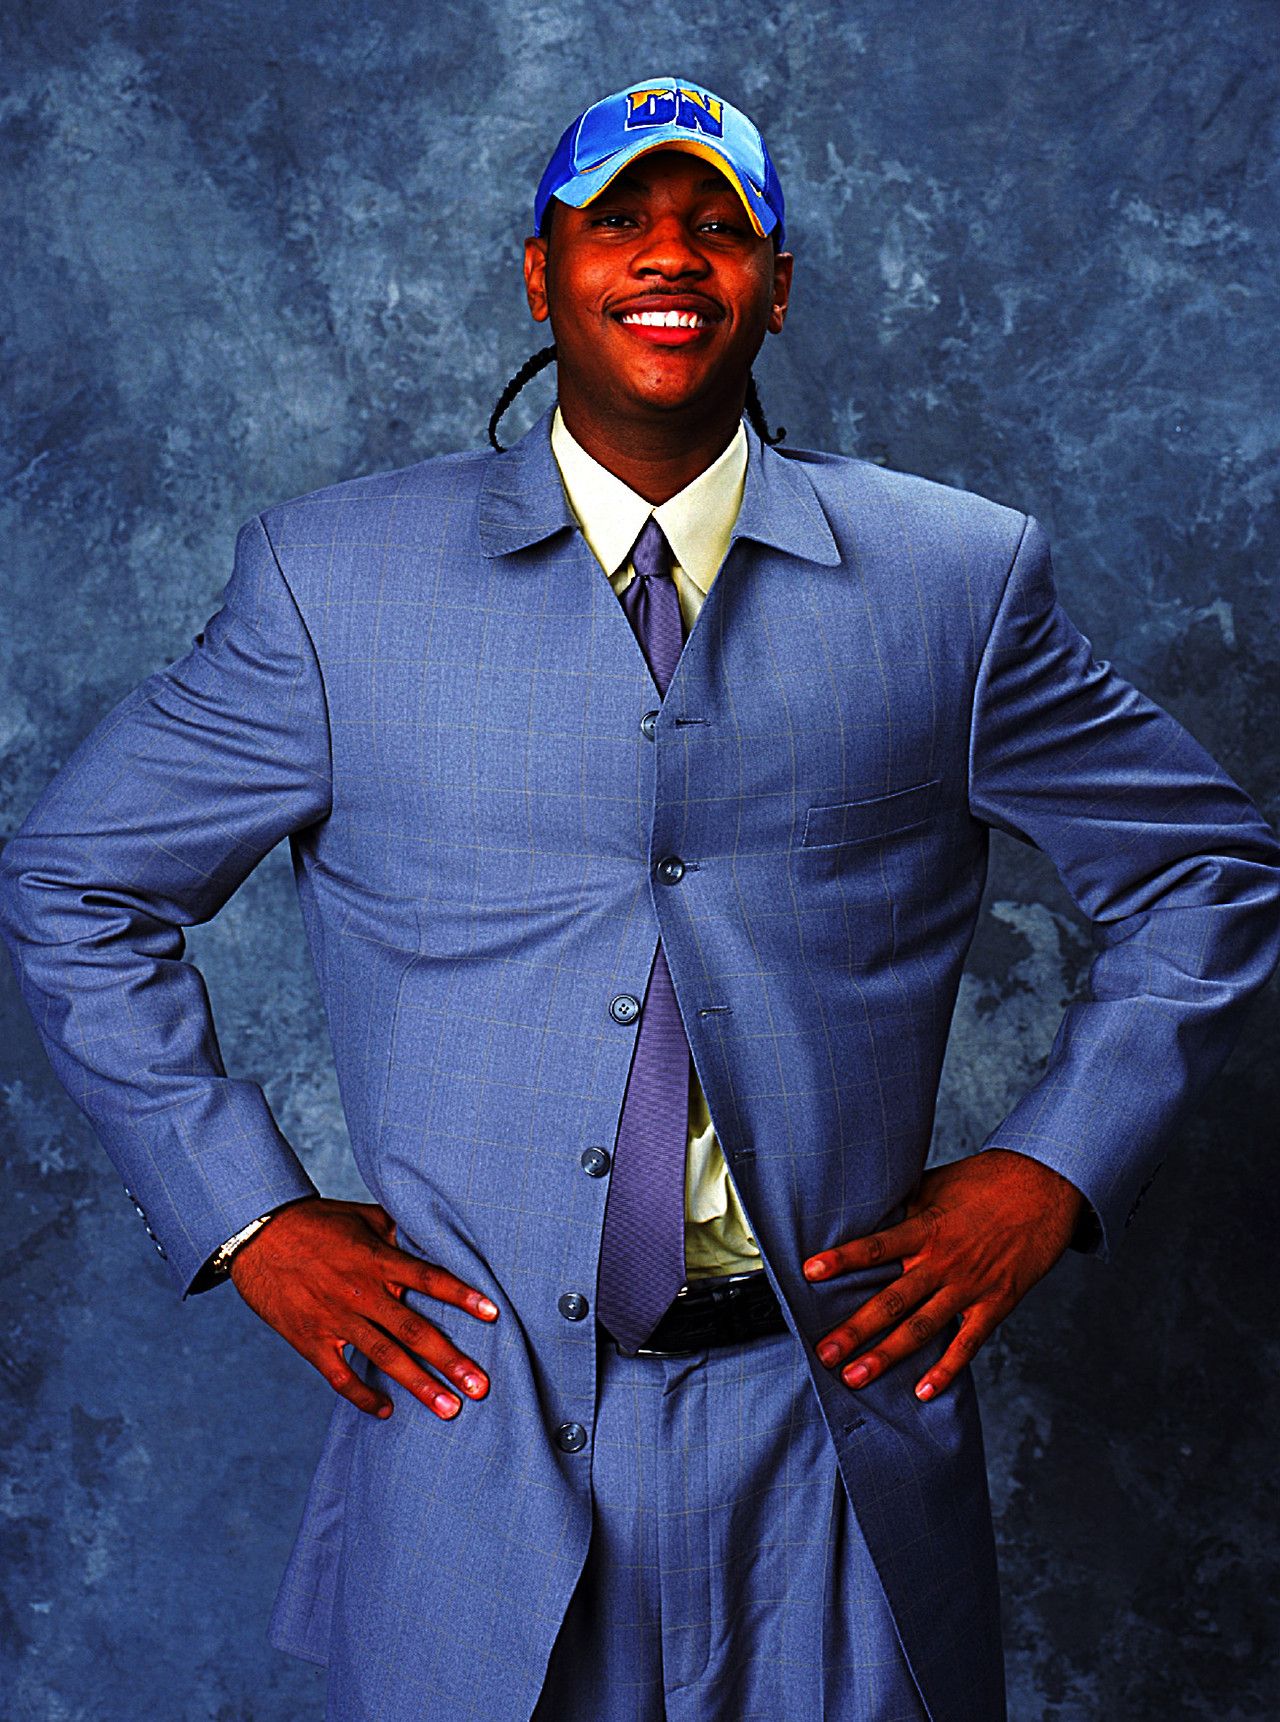 carmelo anthony biography